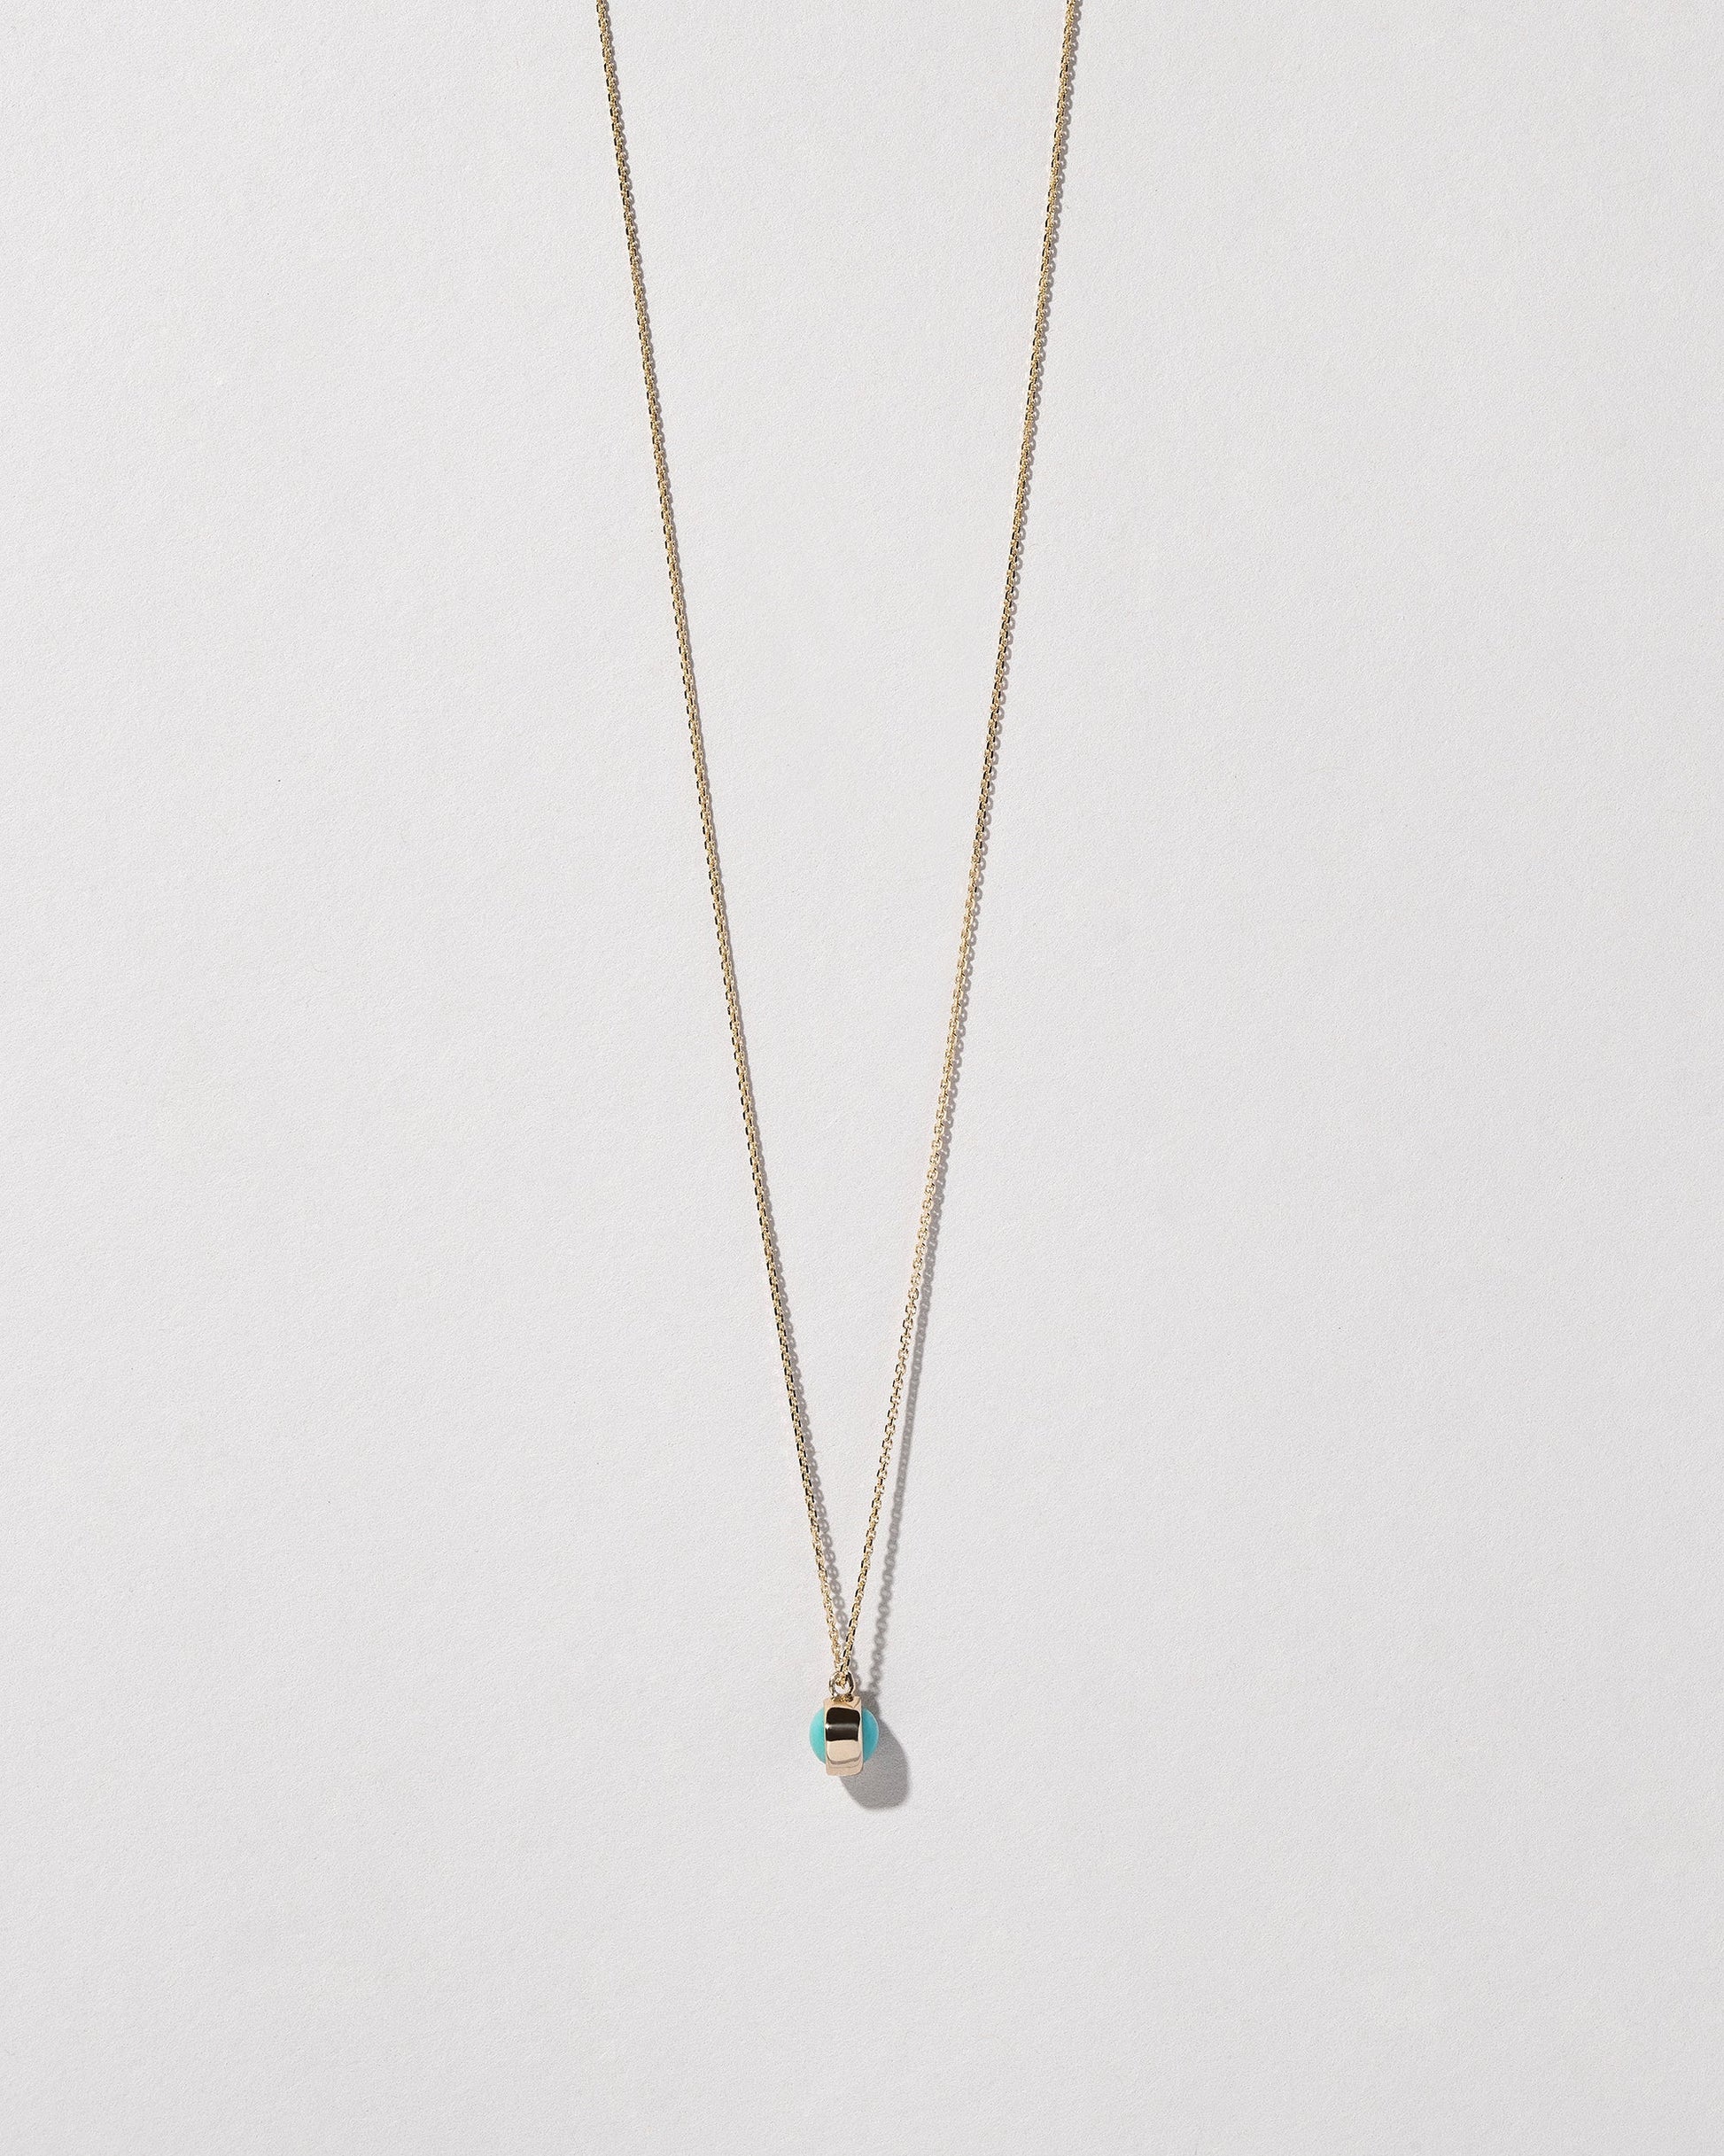 Turquoise Birthstone Necklace on light color background.